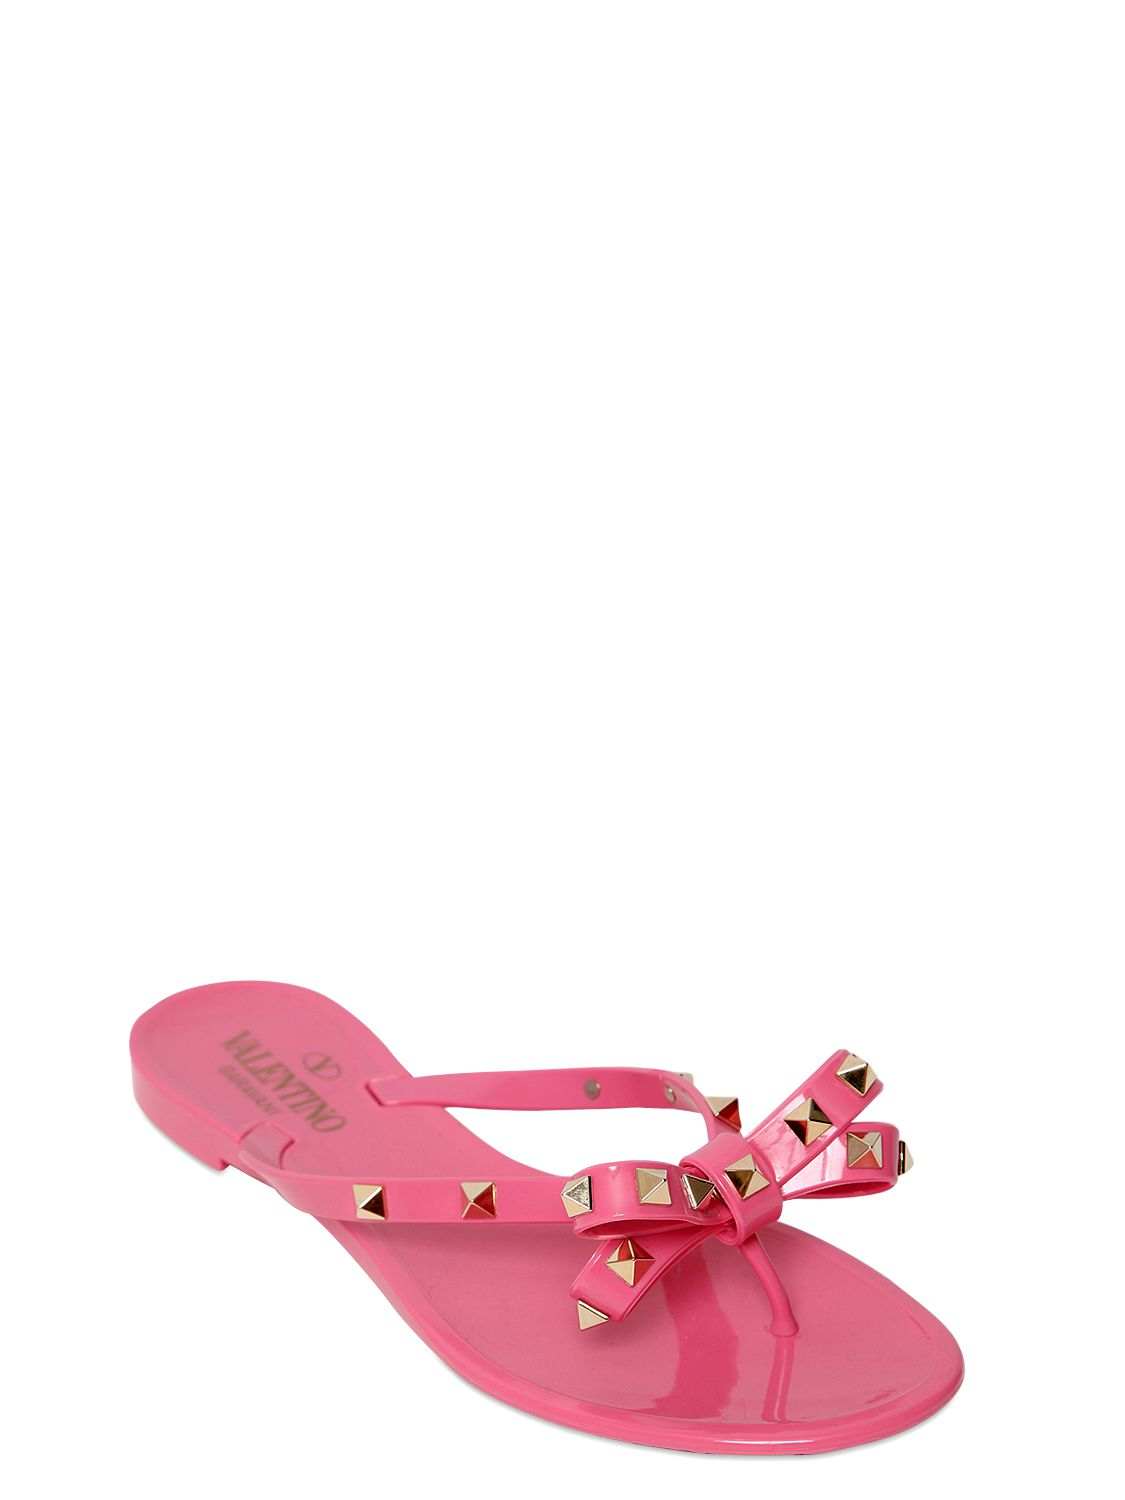 Valentino Rockstud Flip Flops With Bow in Light Pink (Pink) - Lyst